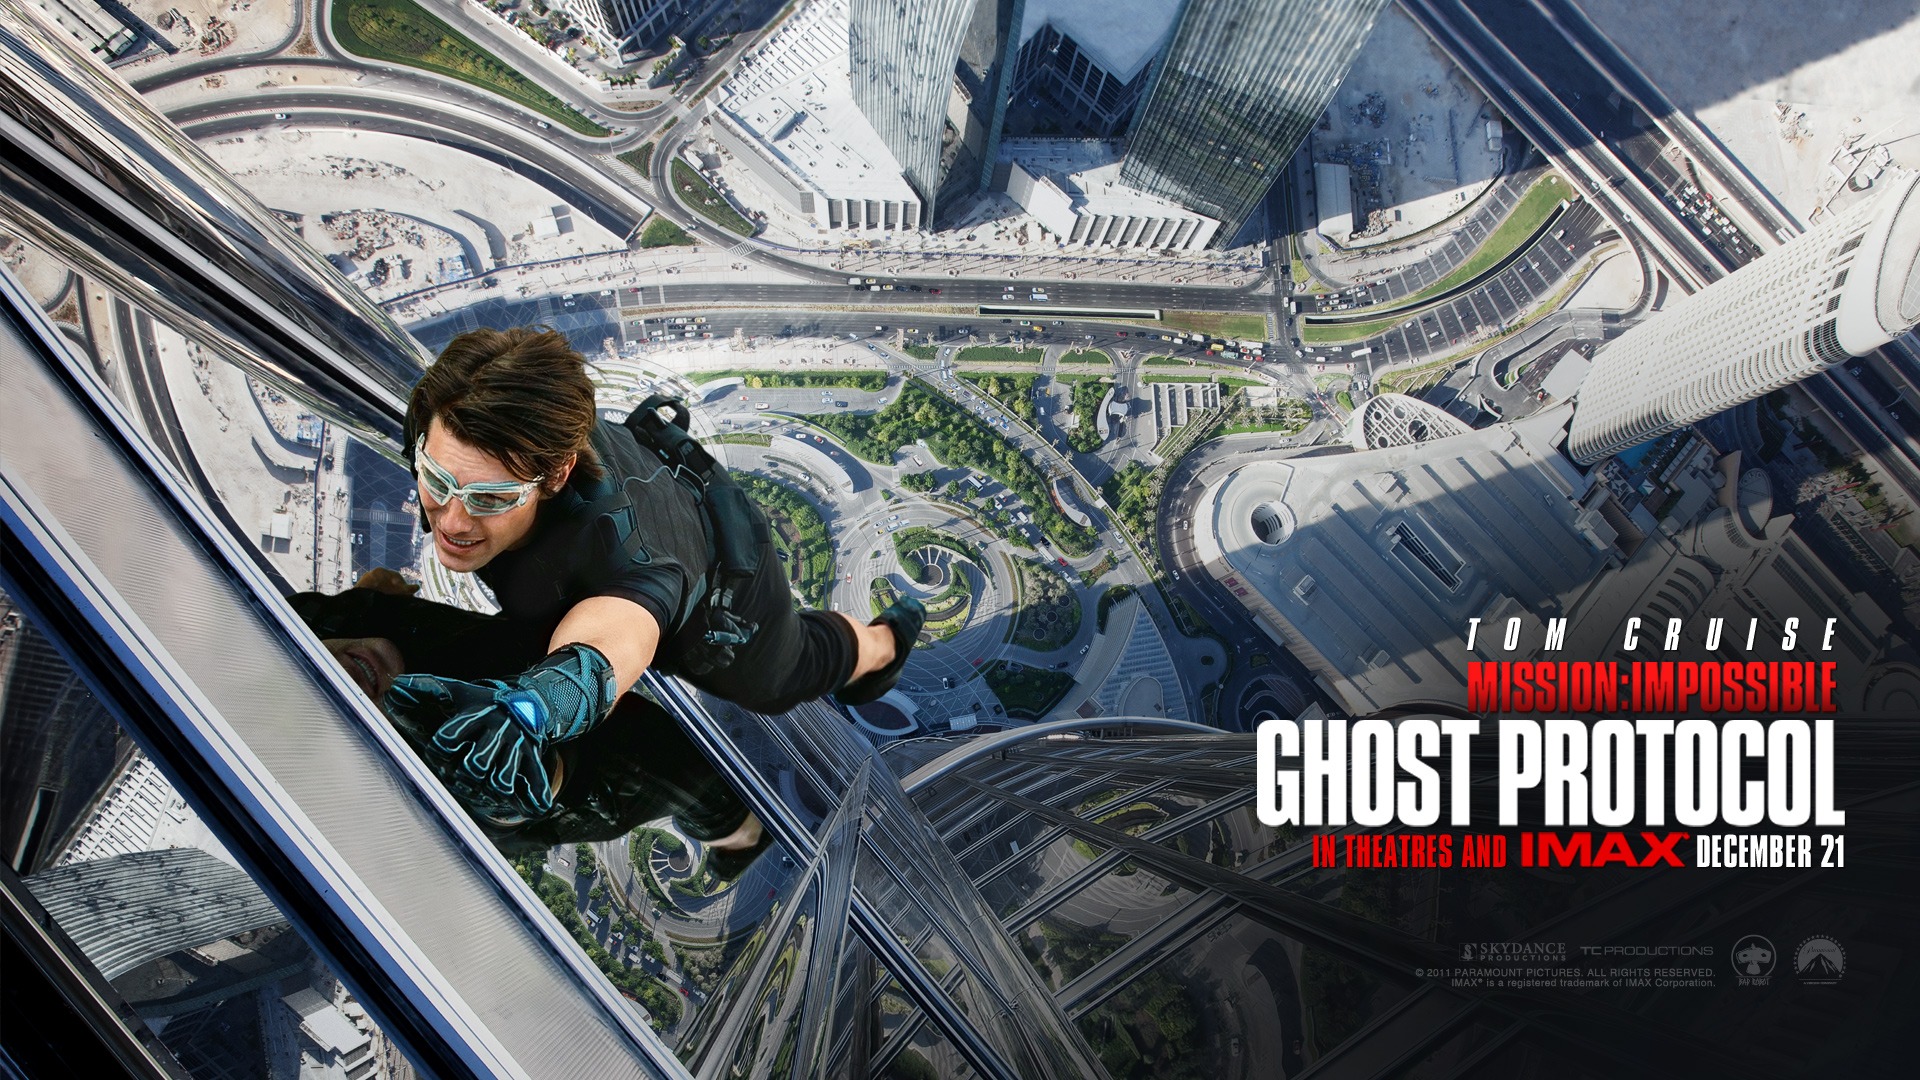 Mission: Impossible - Ghost Protocol 碟中谍4 高清壁纸10 - 1920x1080